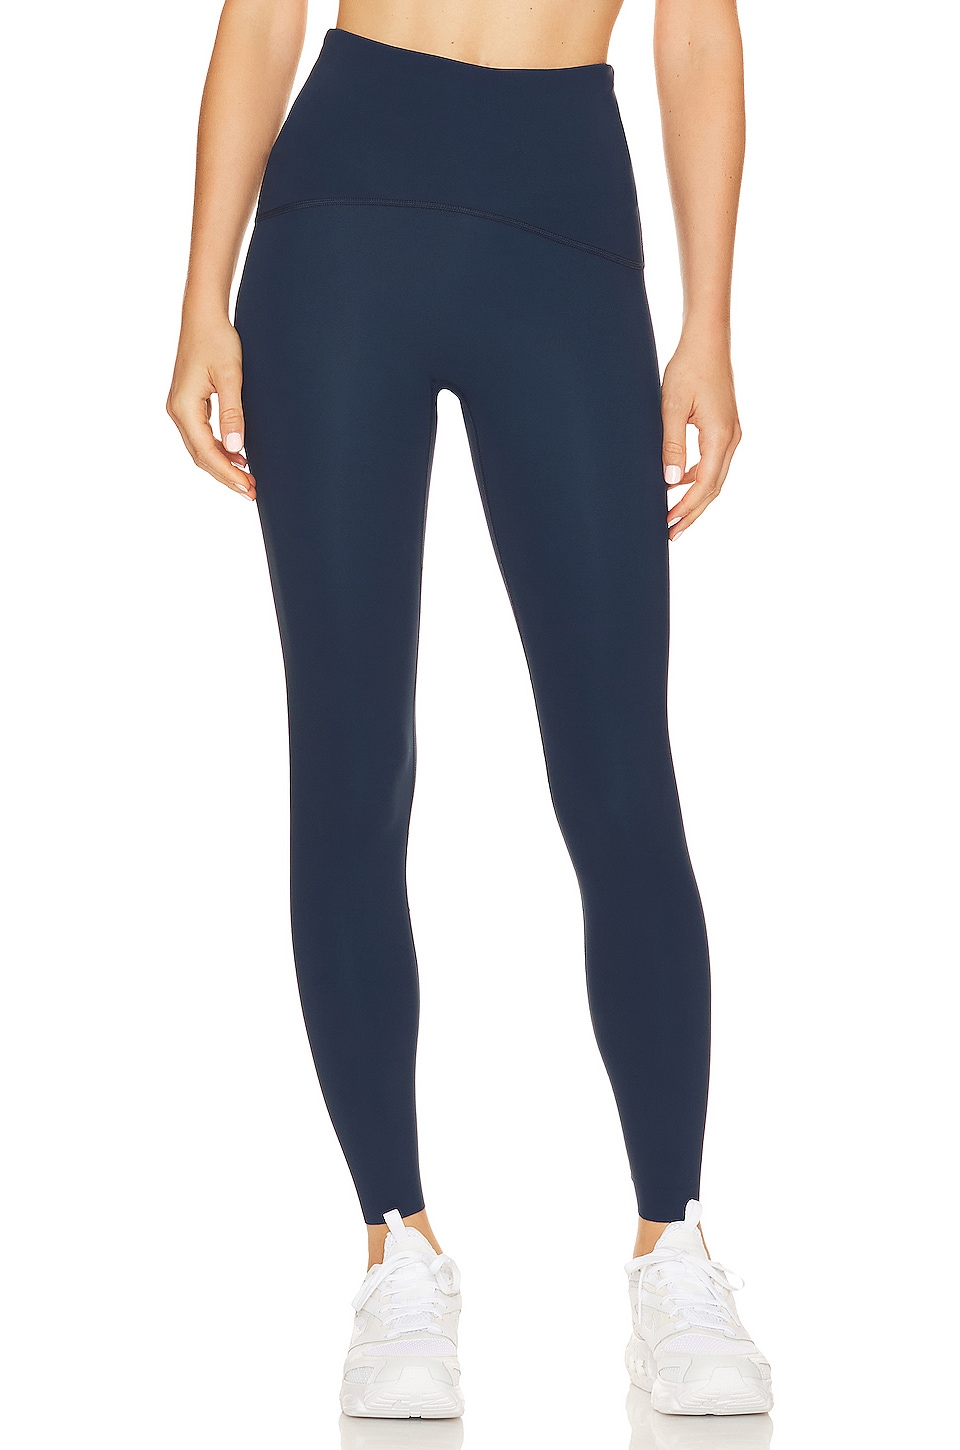 SPANX - Introducing non-shaping leggings for girls! Ever